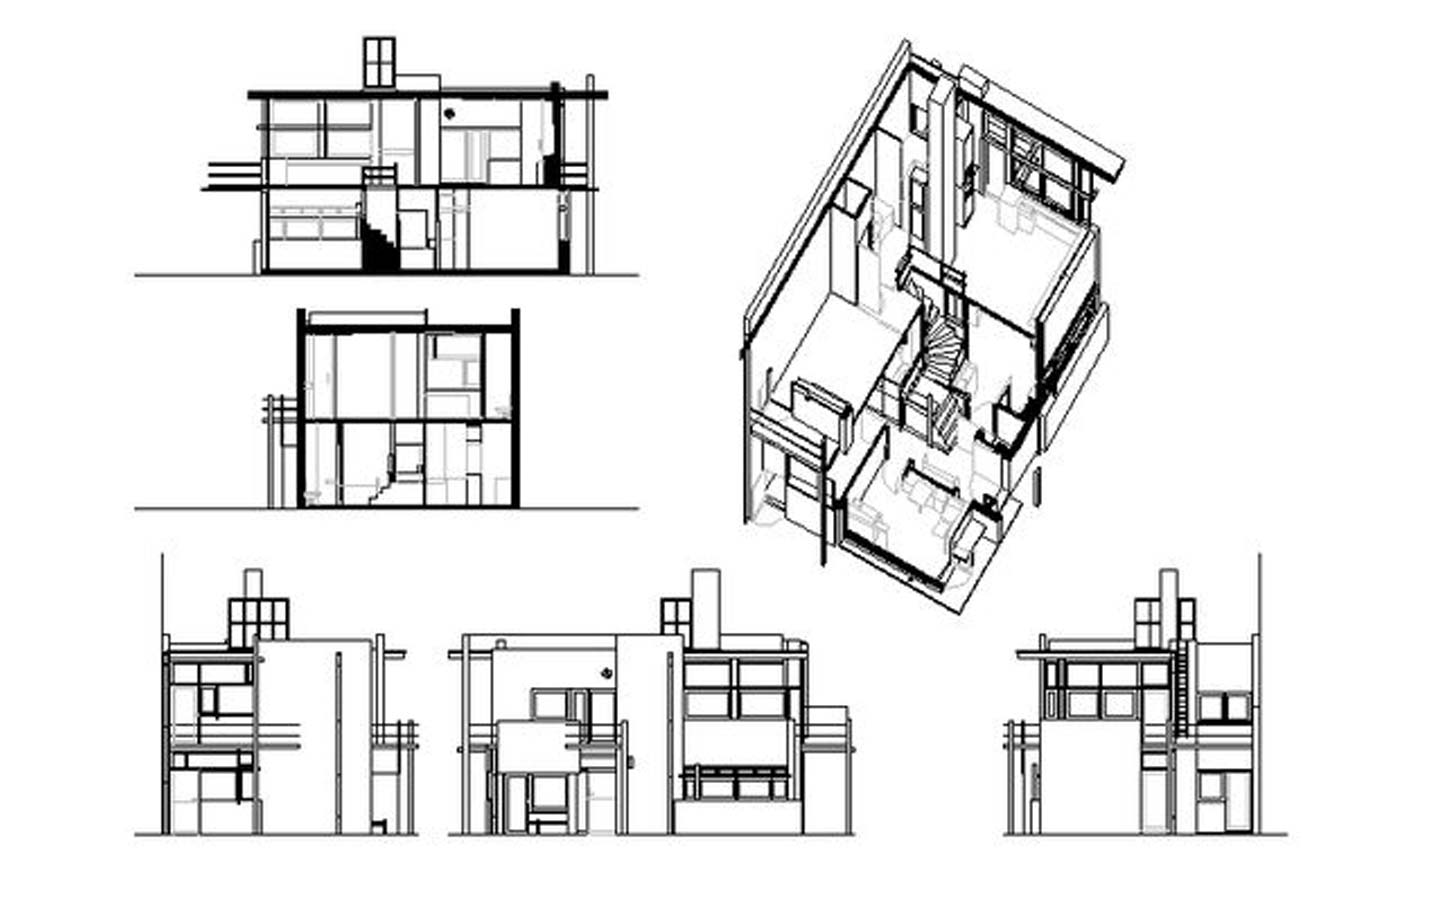 rietveld schroder house elevation plans and sections axonometric